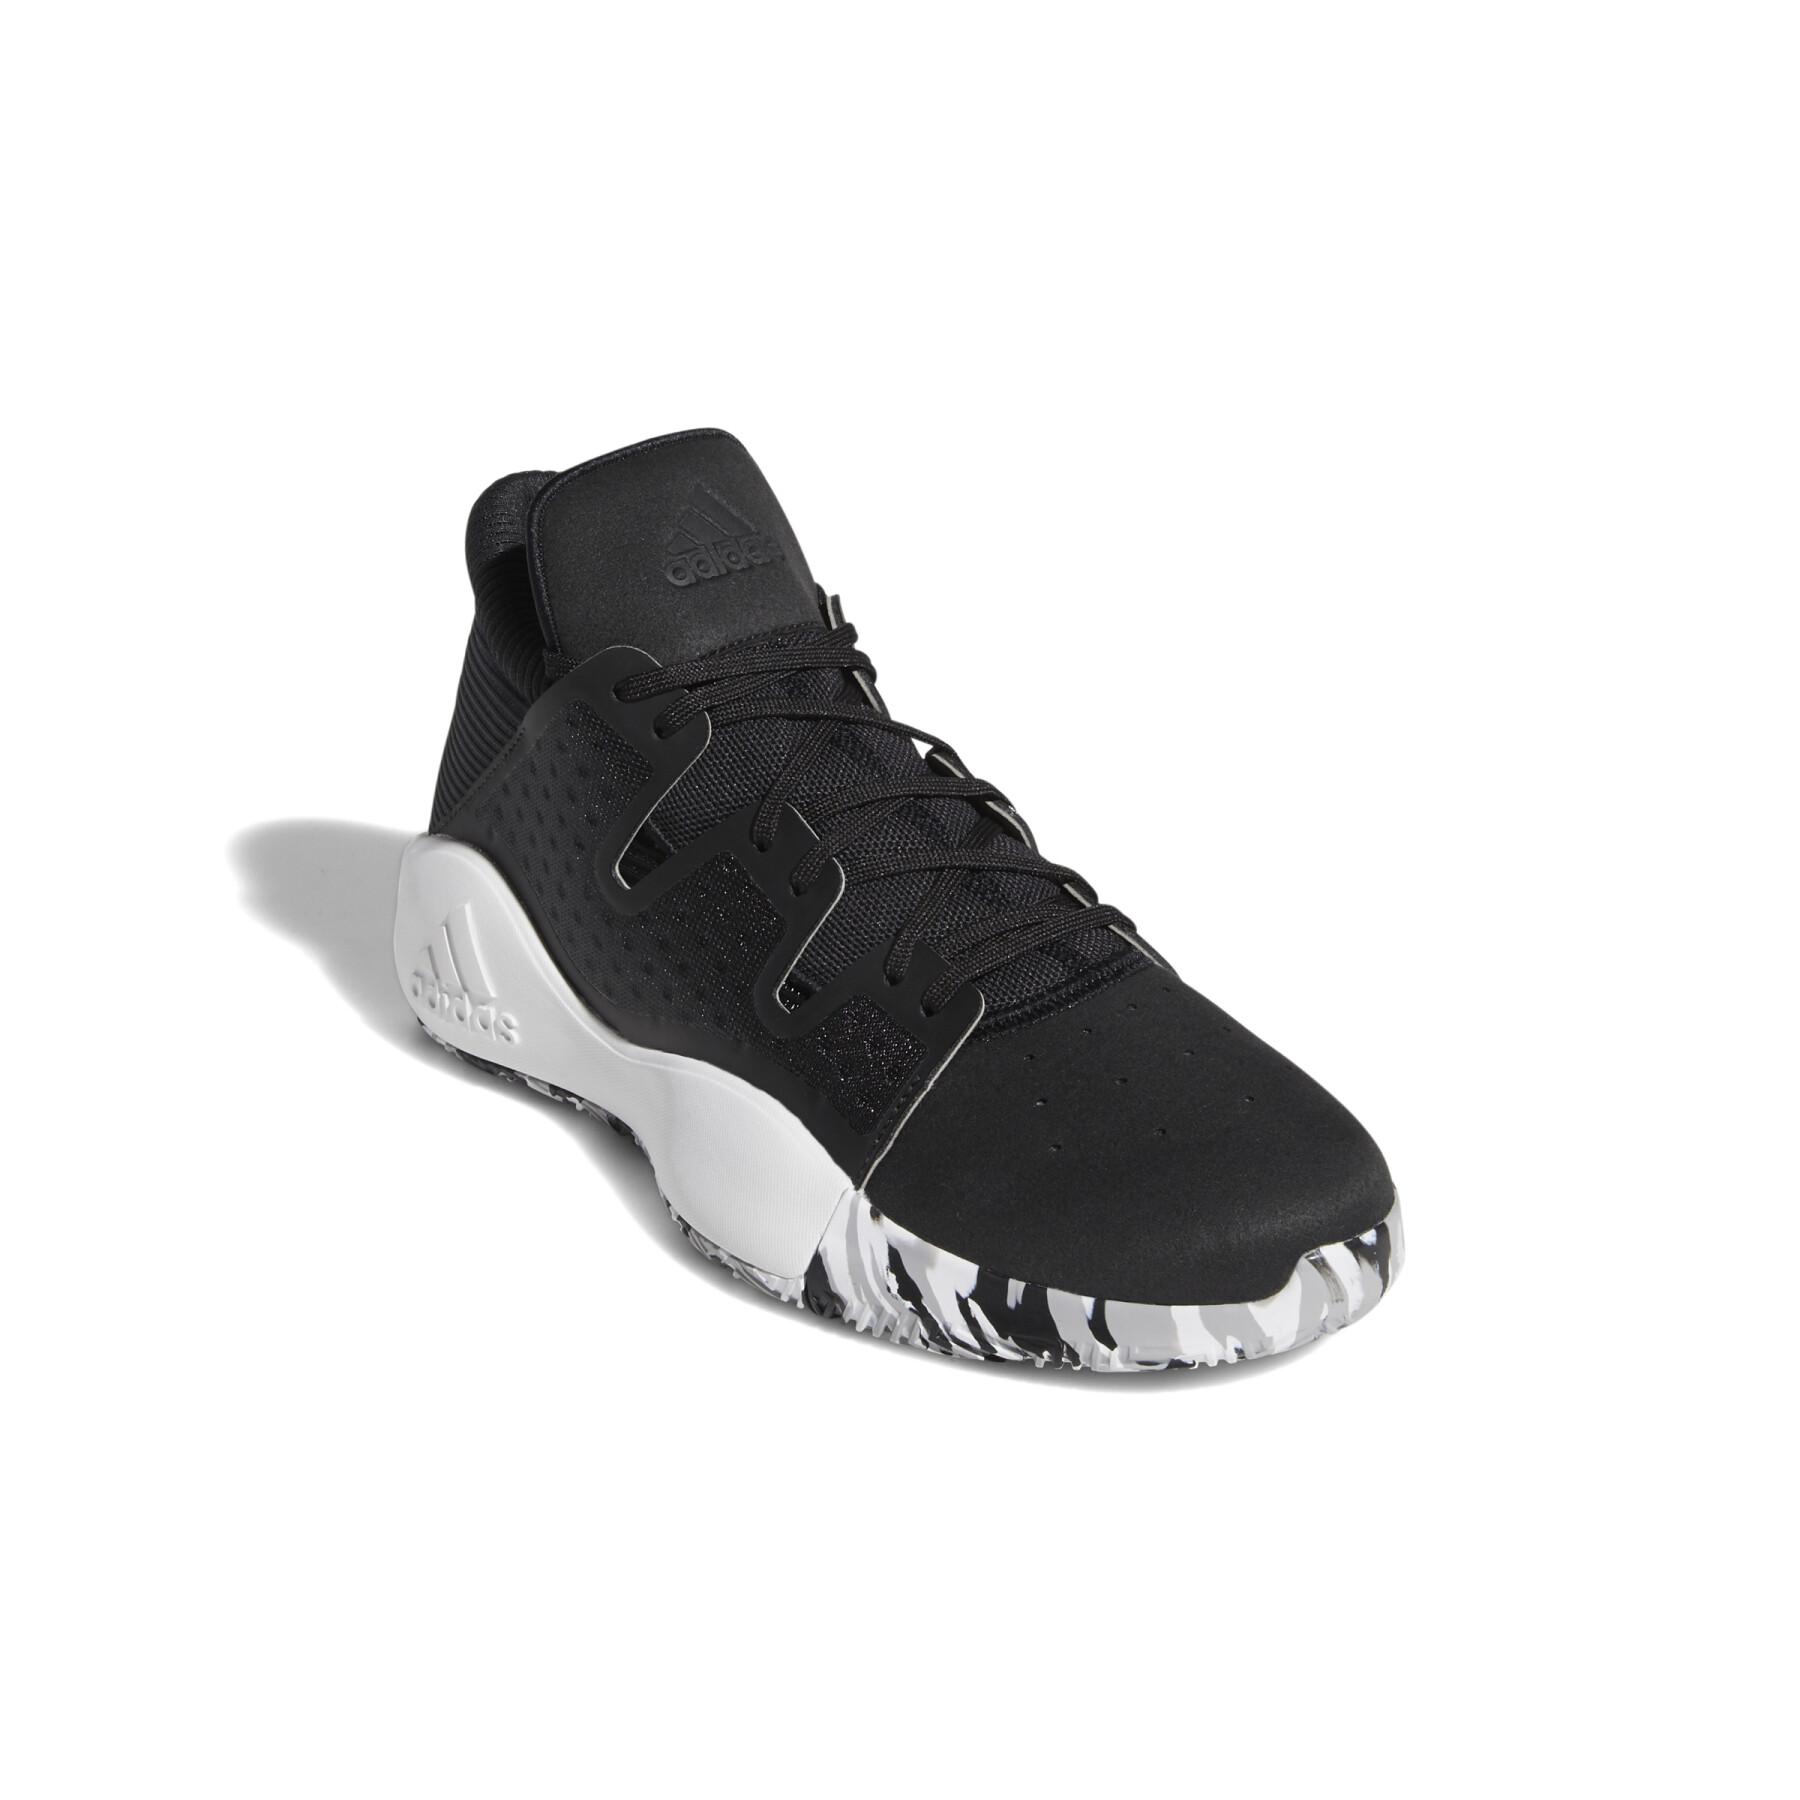 Chaussures indoor adidas Pro Vision